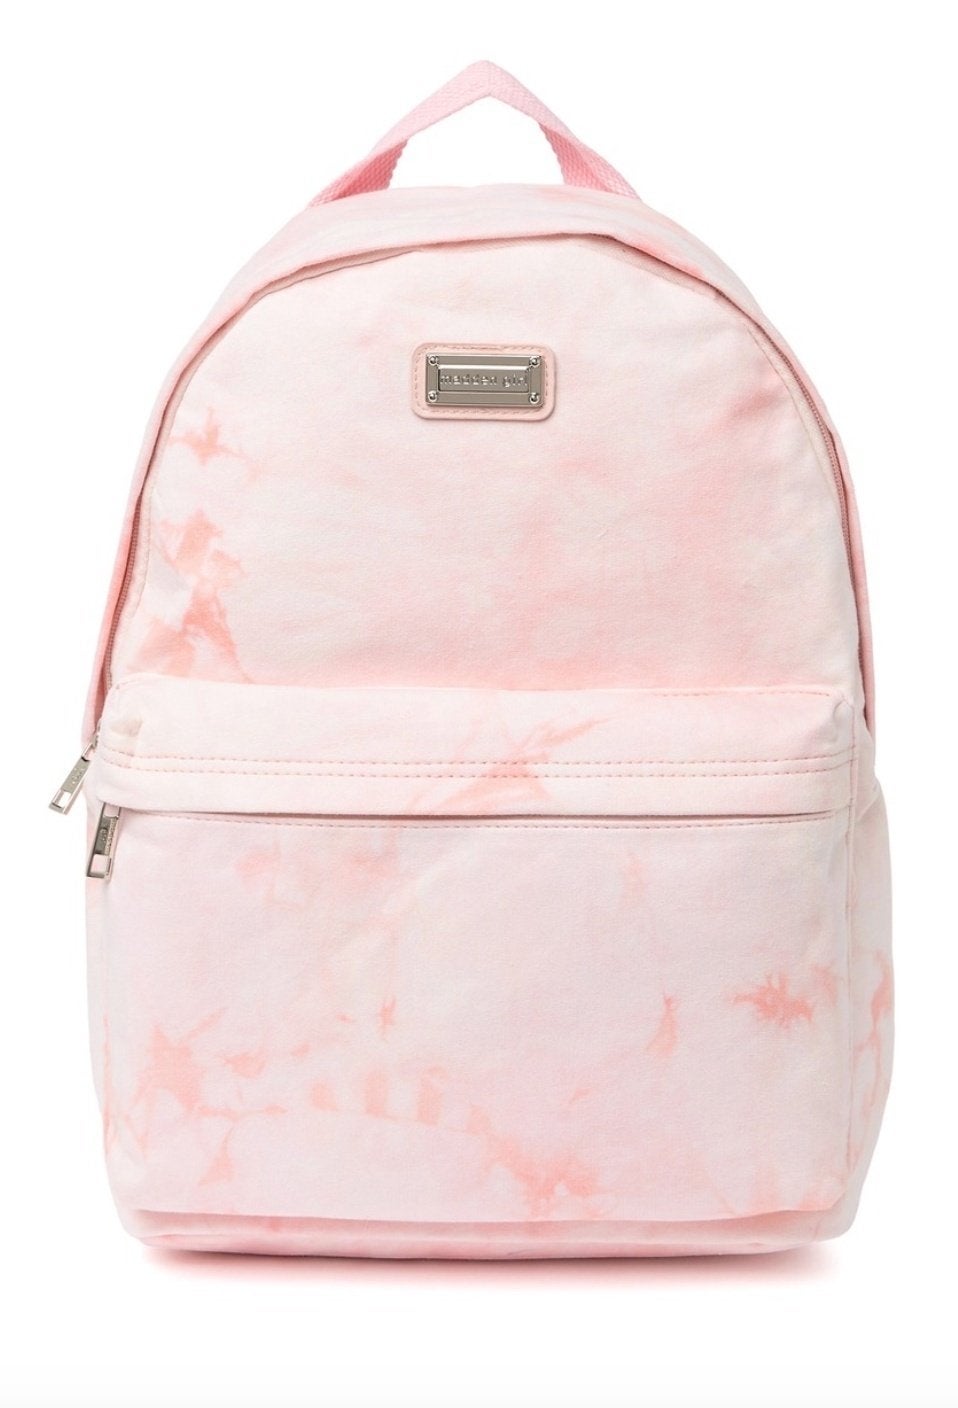 tie-dyed-mini-backpack